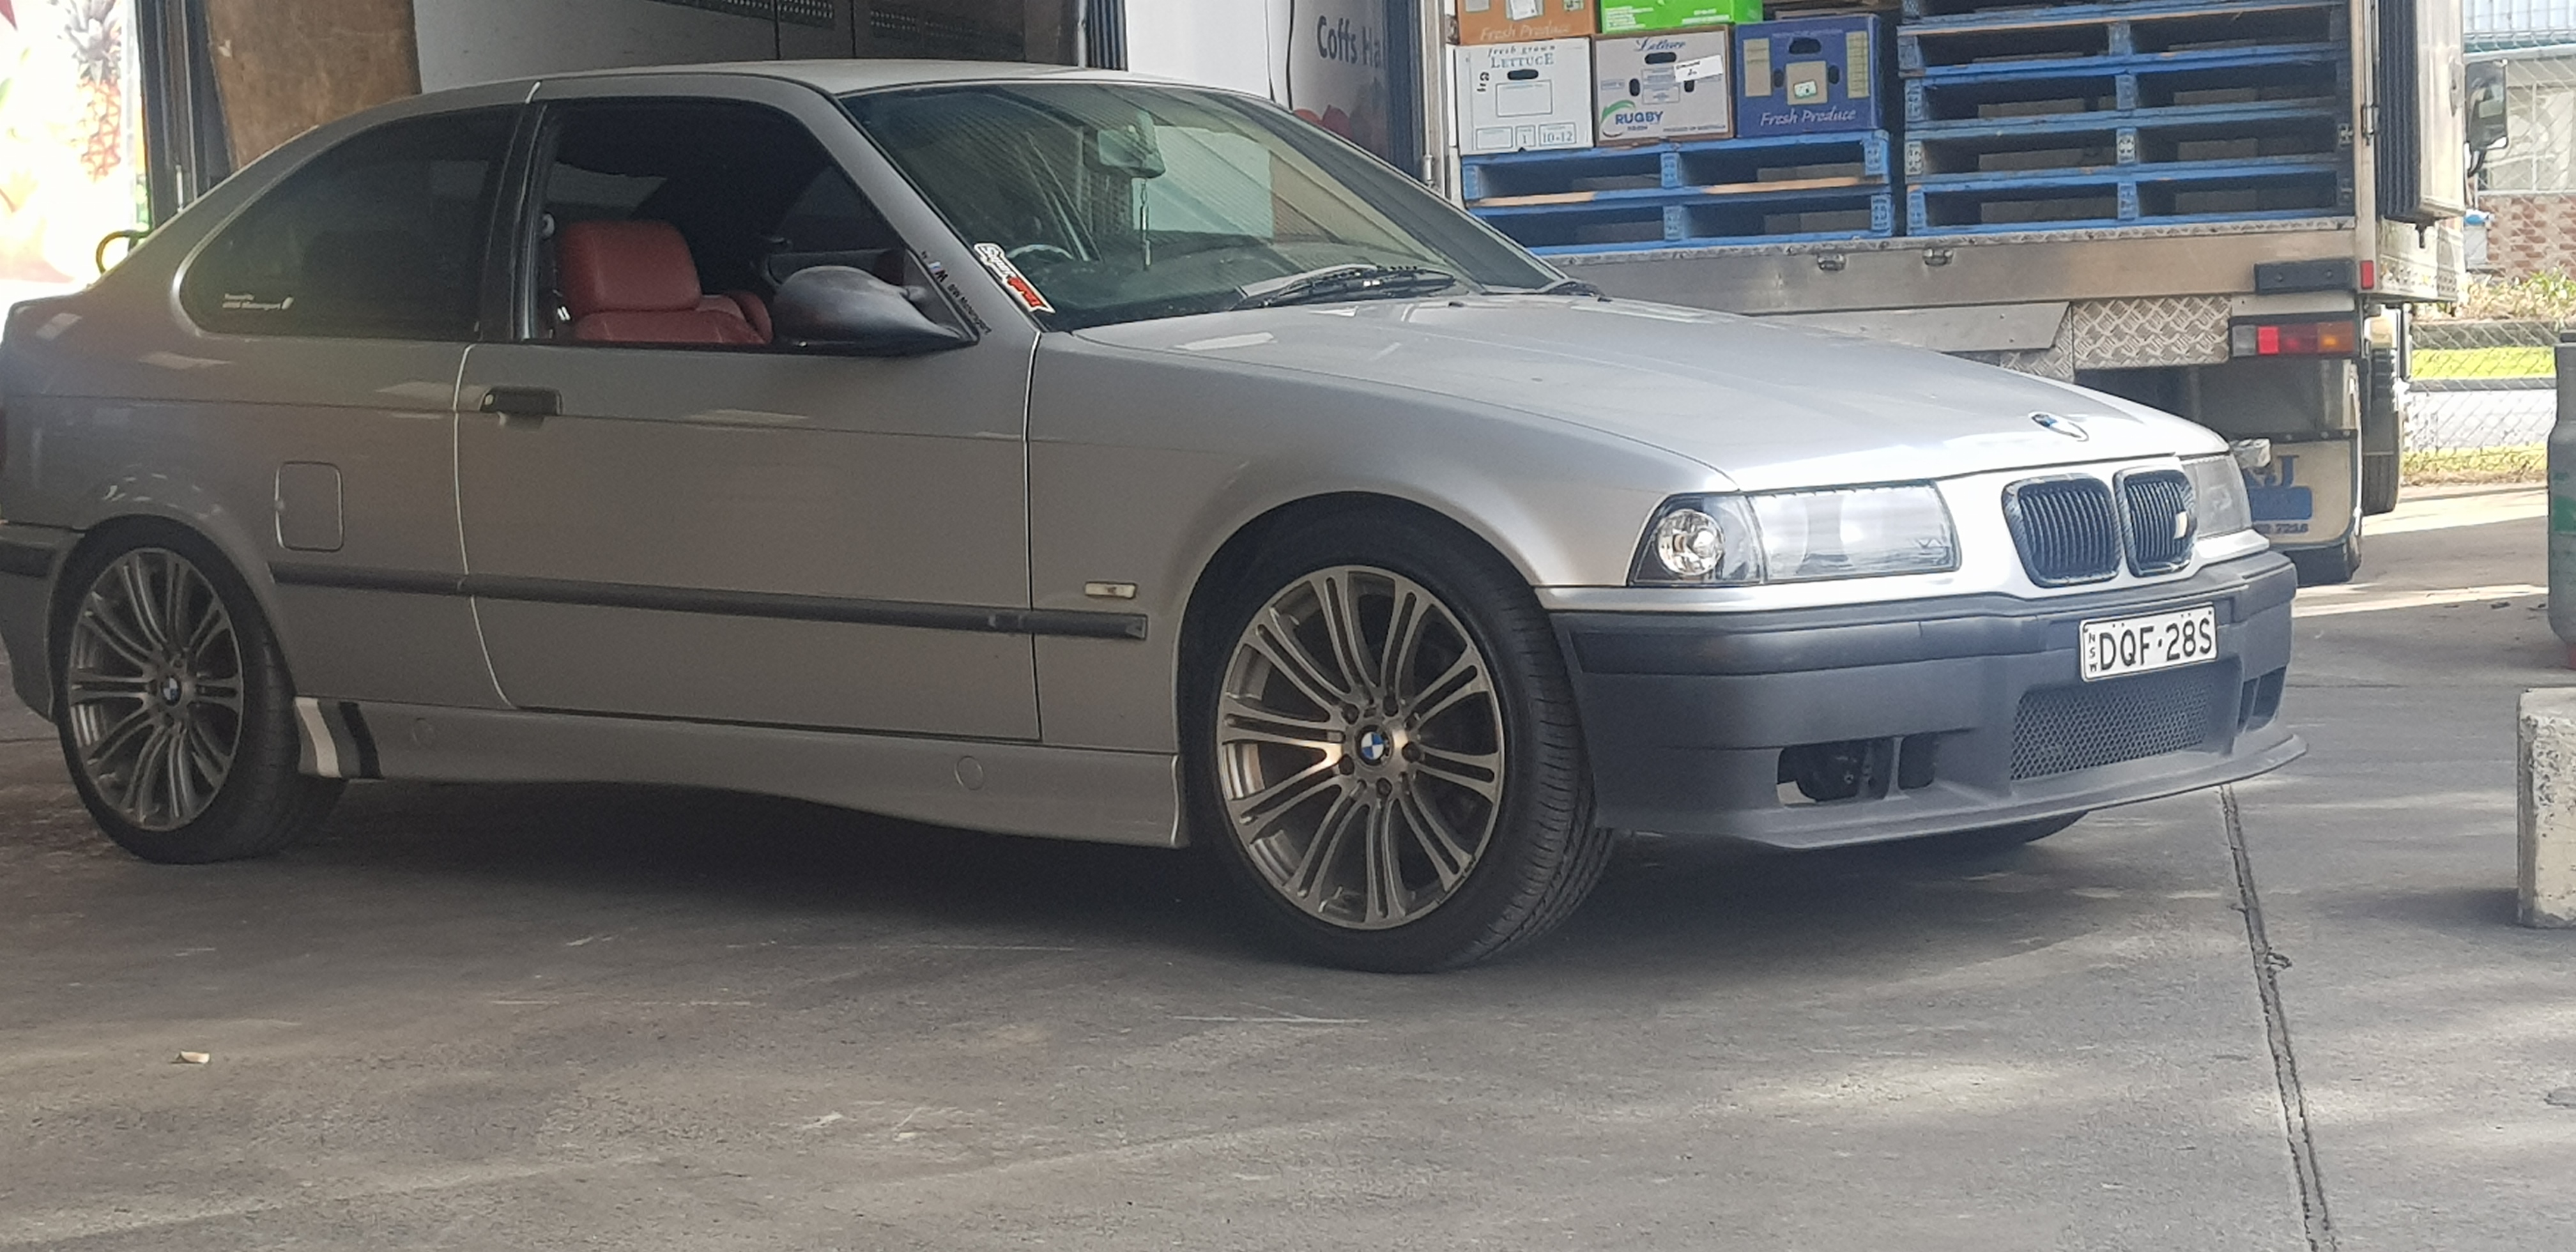 2000 BMW 318i For Sale or Swap NSW Mid North Coast 3062968